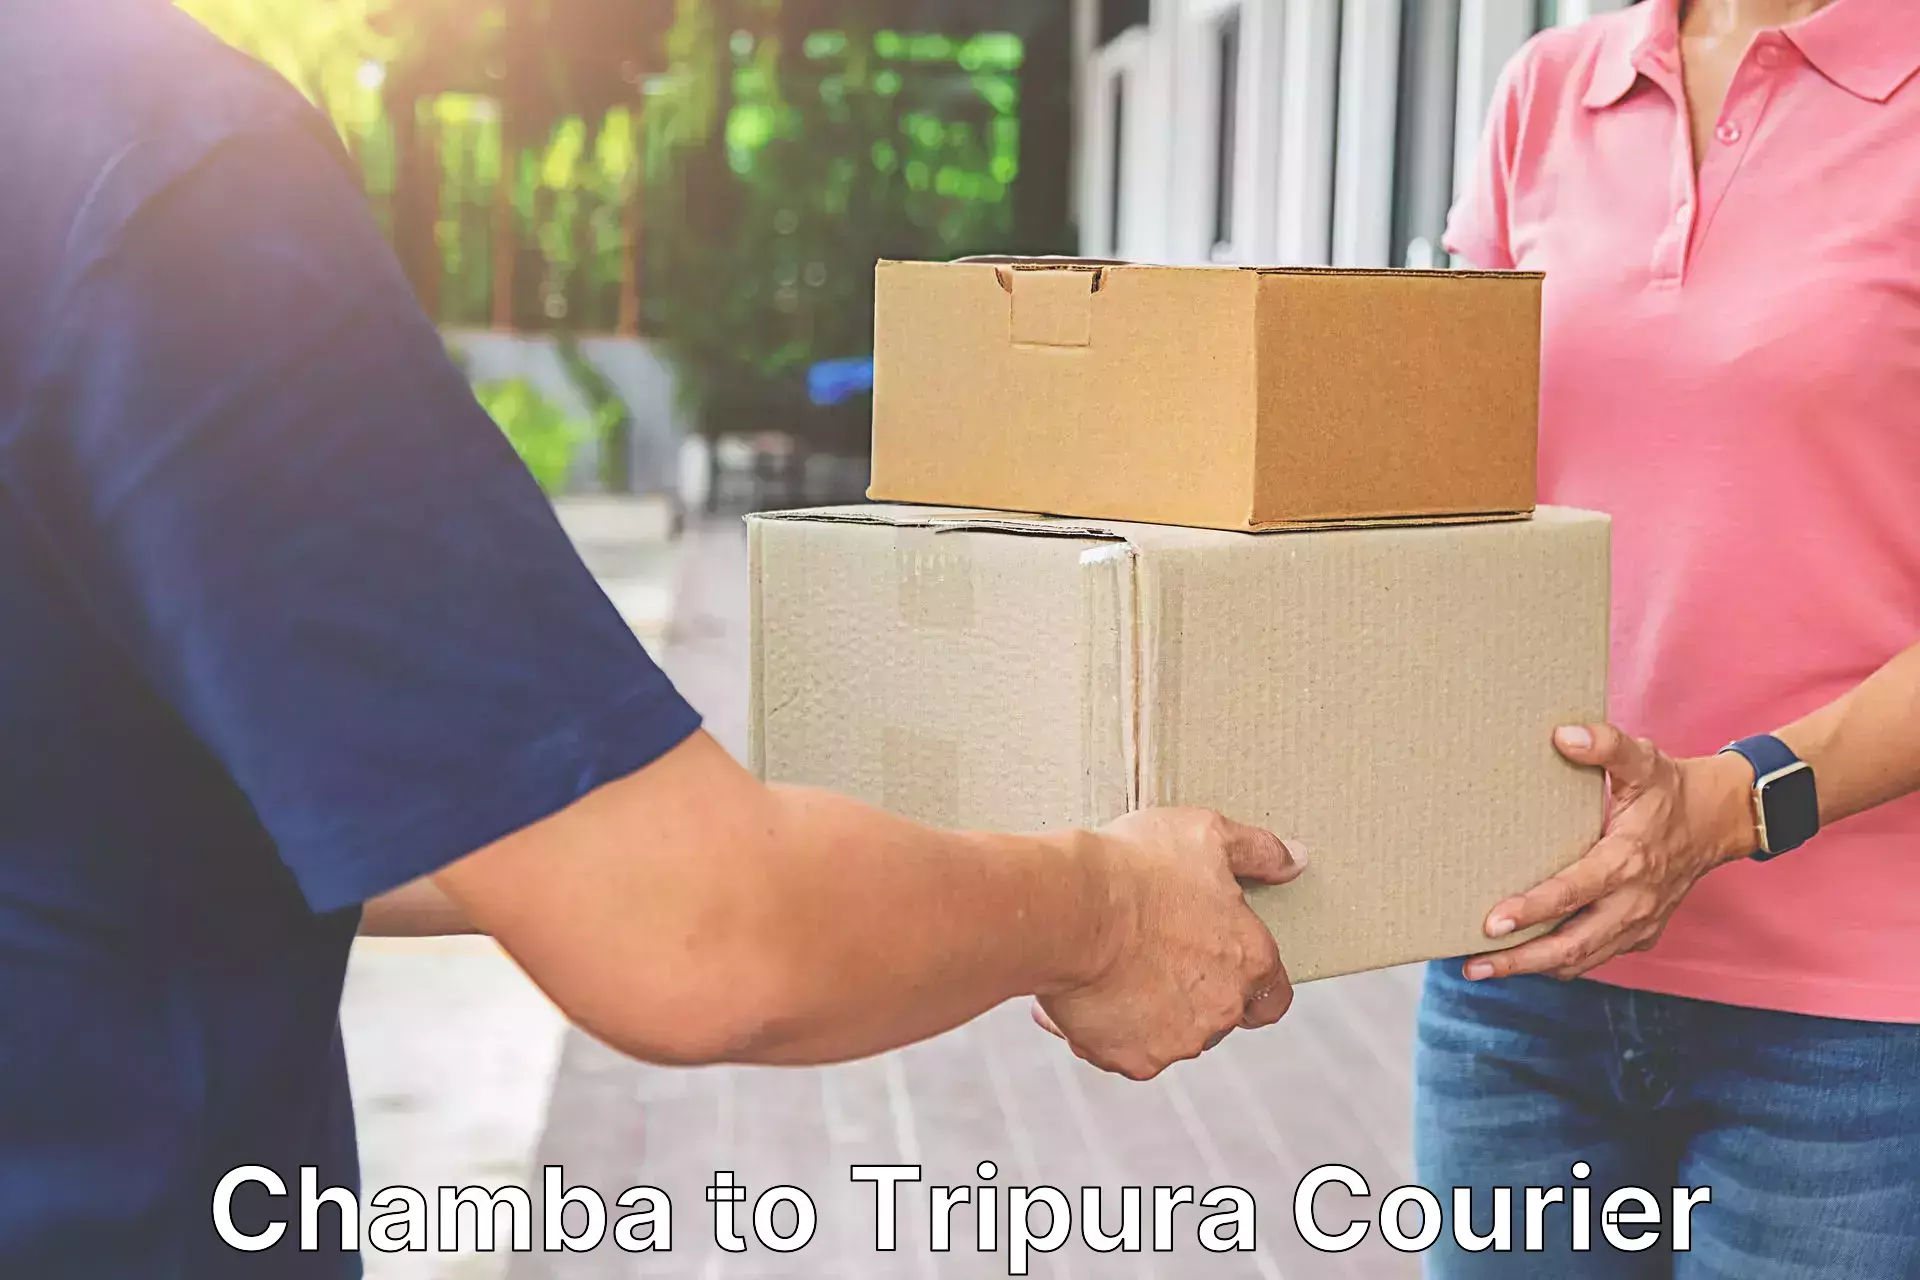 Secure packaging Chamba to Udaipur Tripura